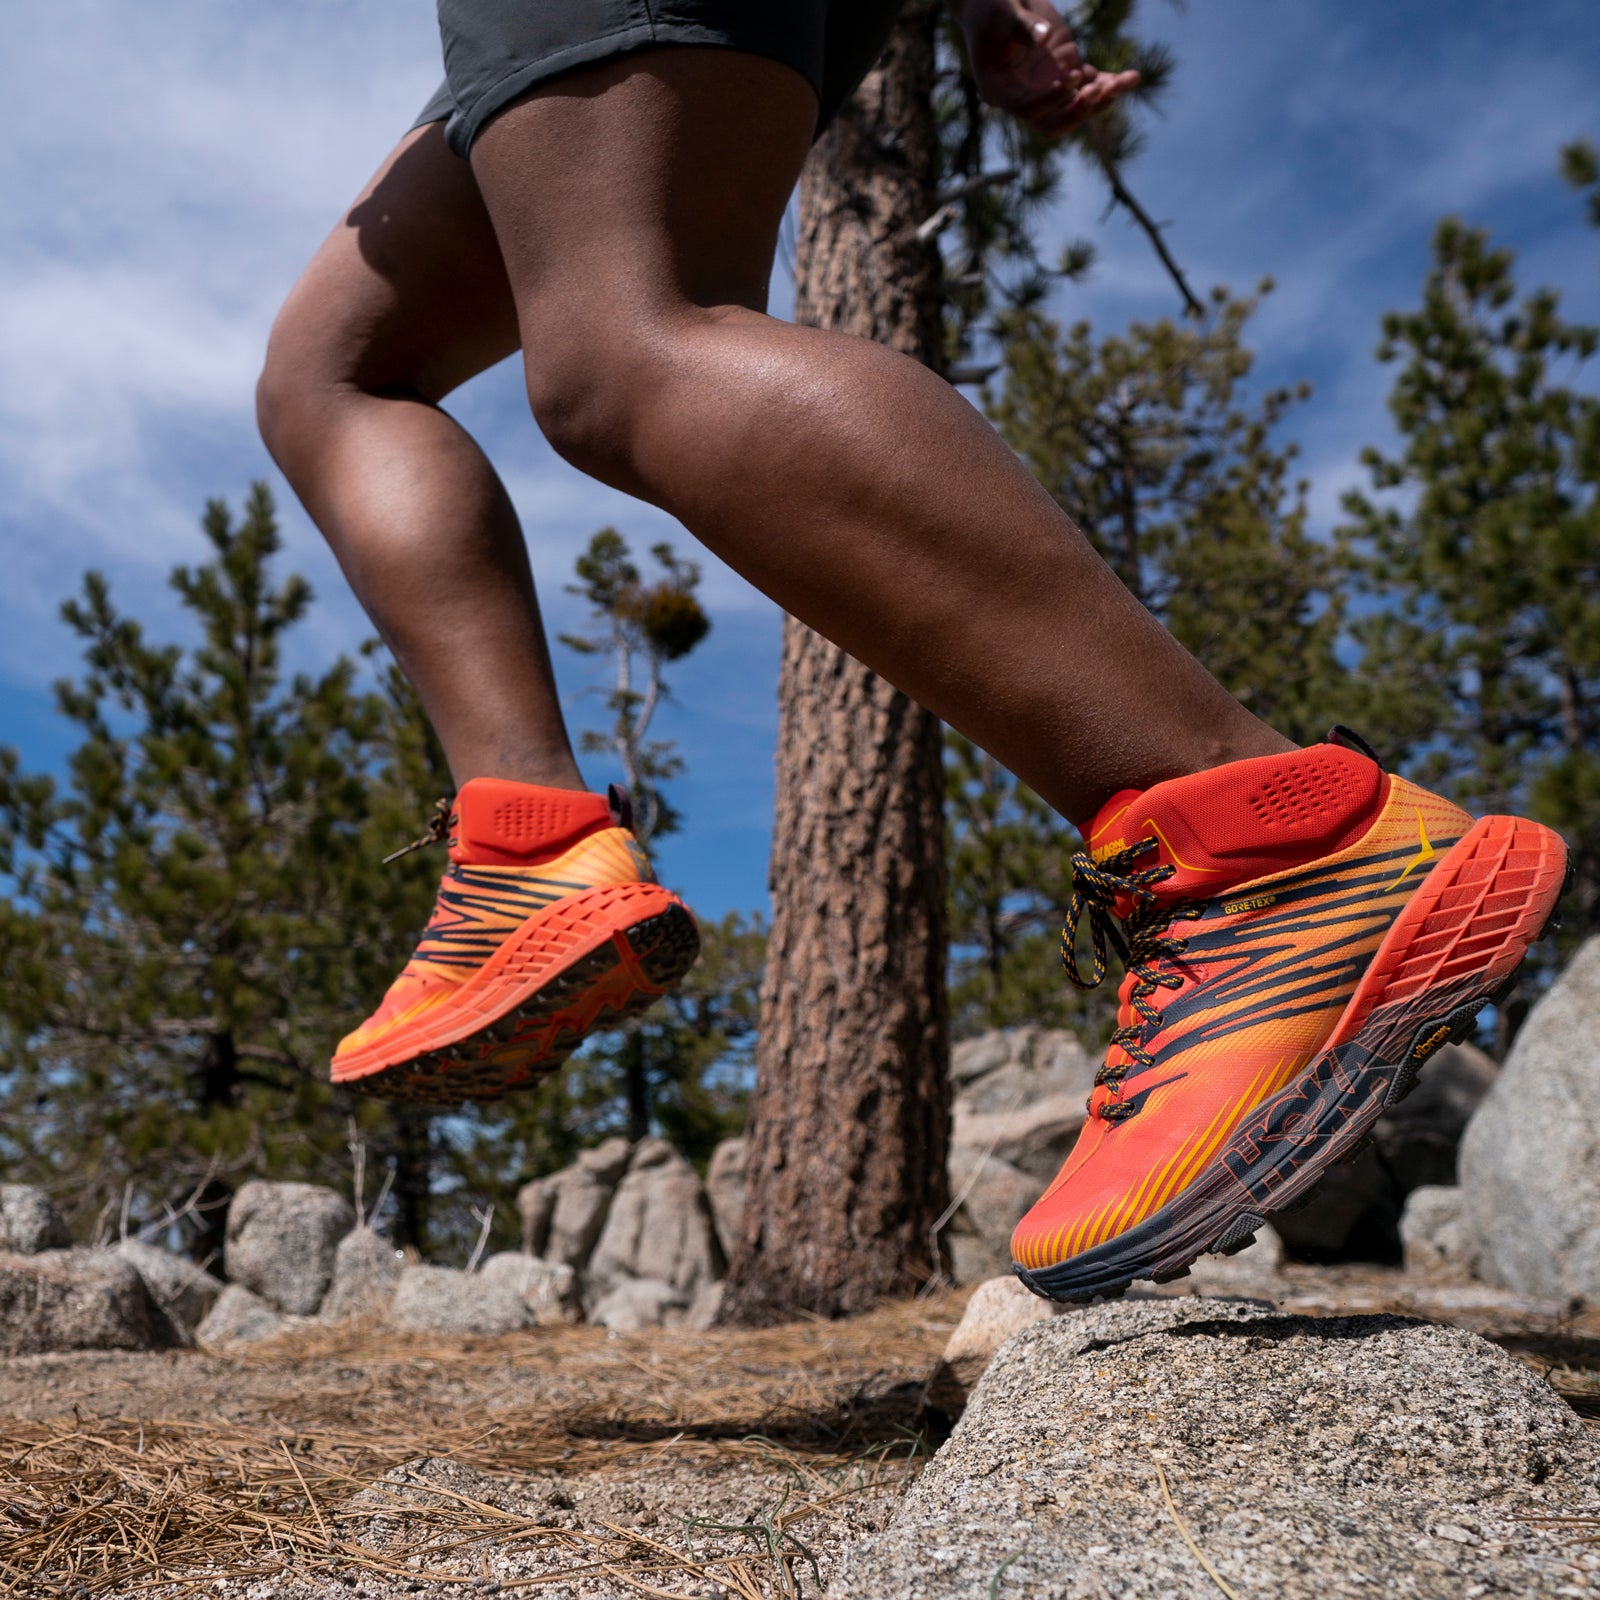 The Hoka Speedgoat Mids Cured My Blisters